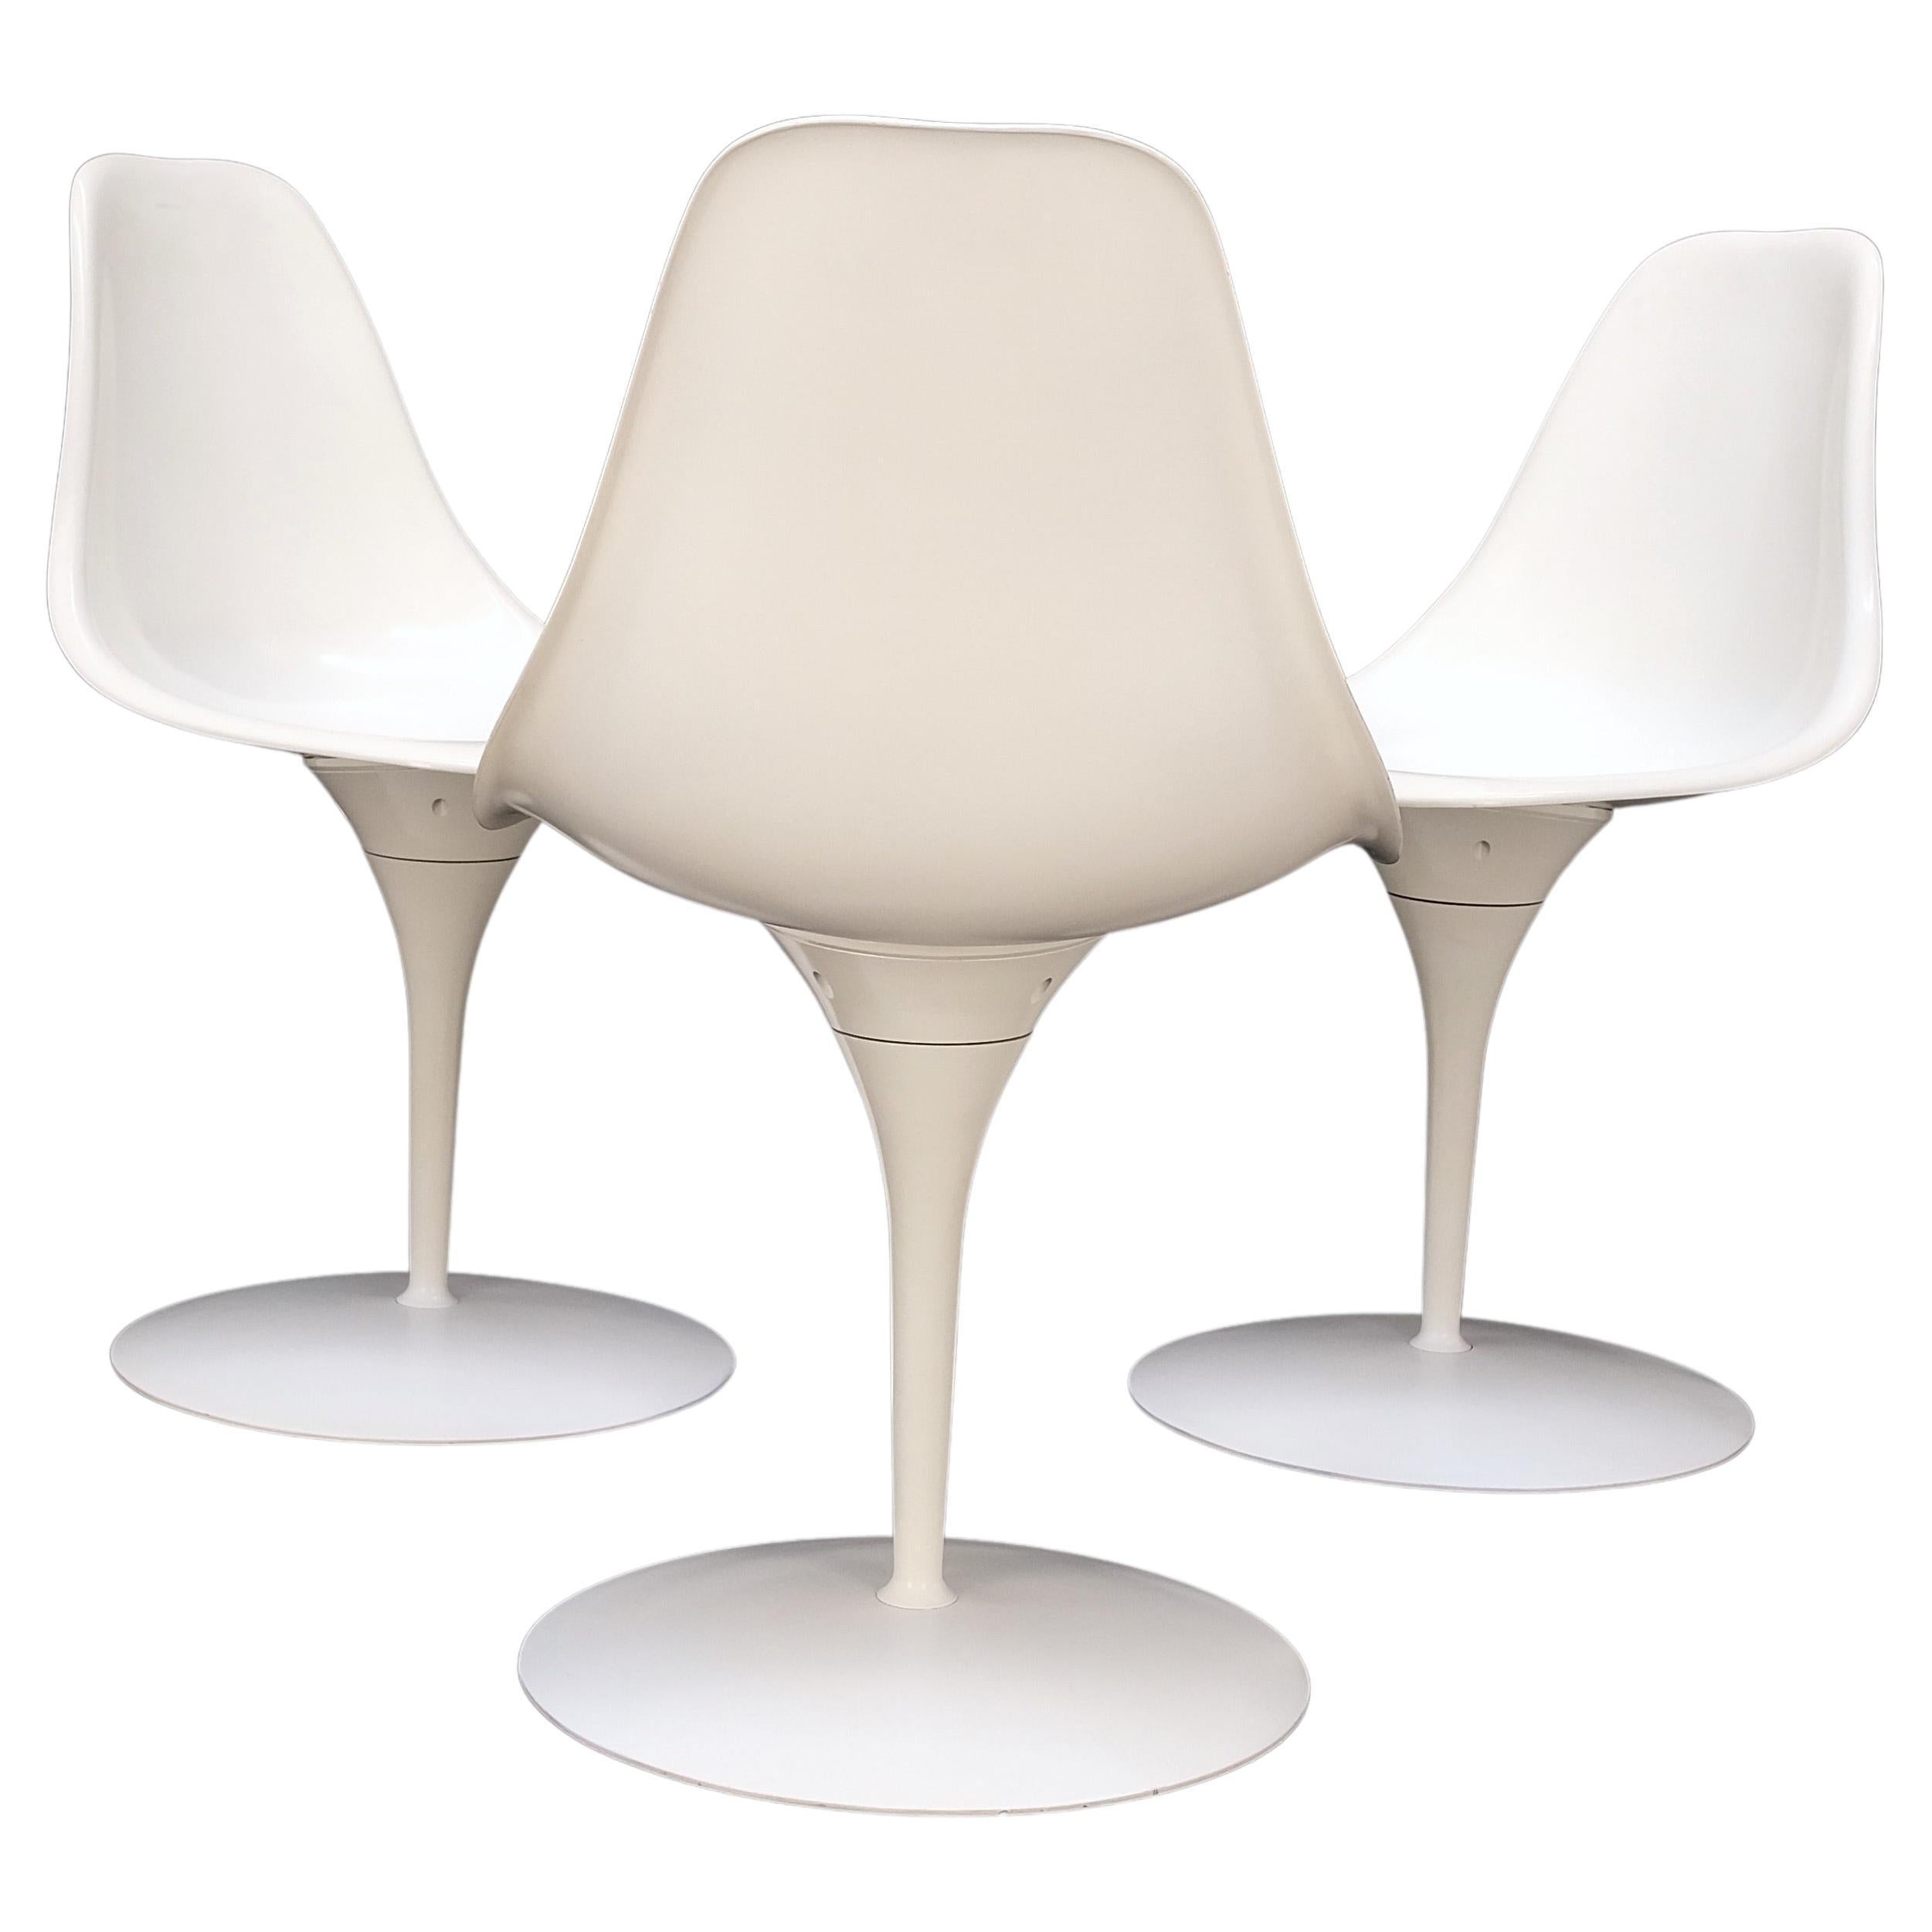 Set of 3 Mid Century Modern Tulip Base White Fiberglass Side Dining Chairs MINT! For Sale